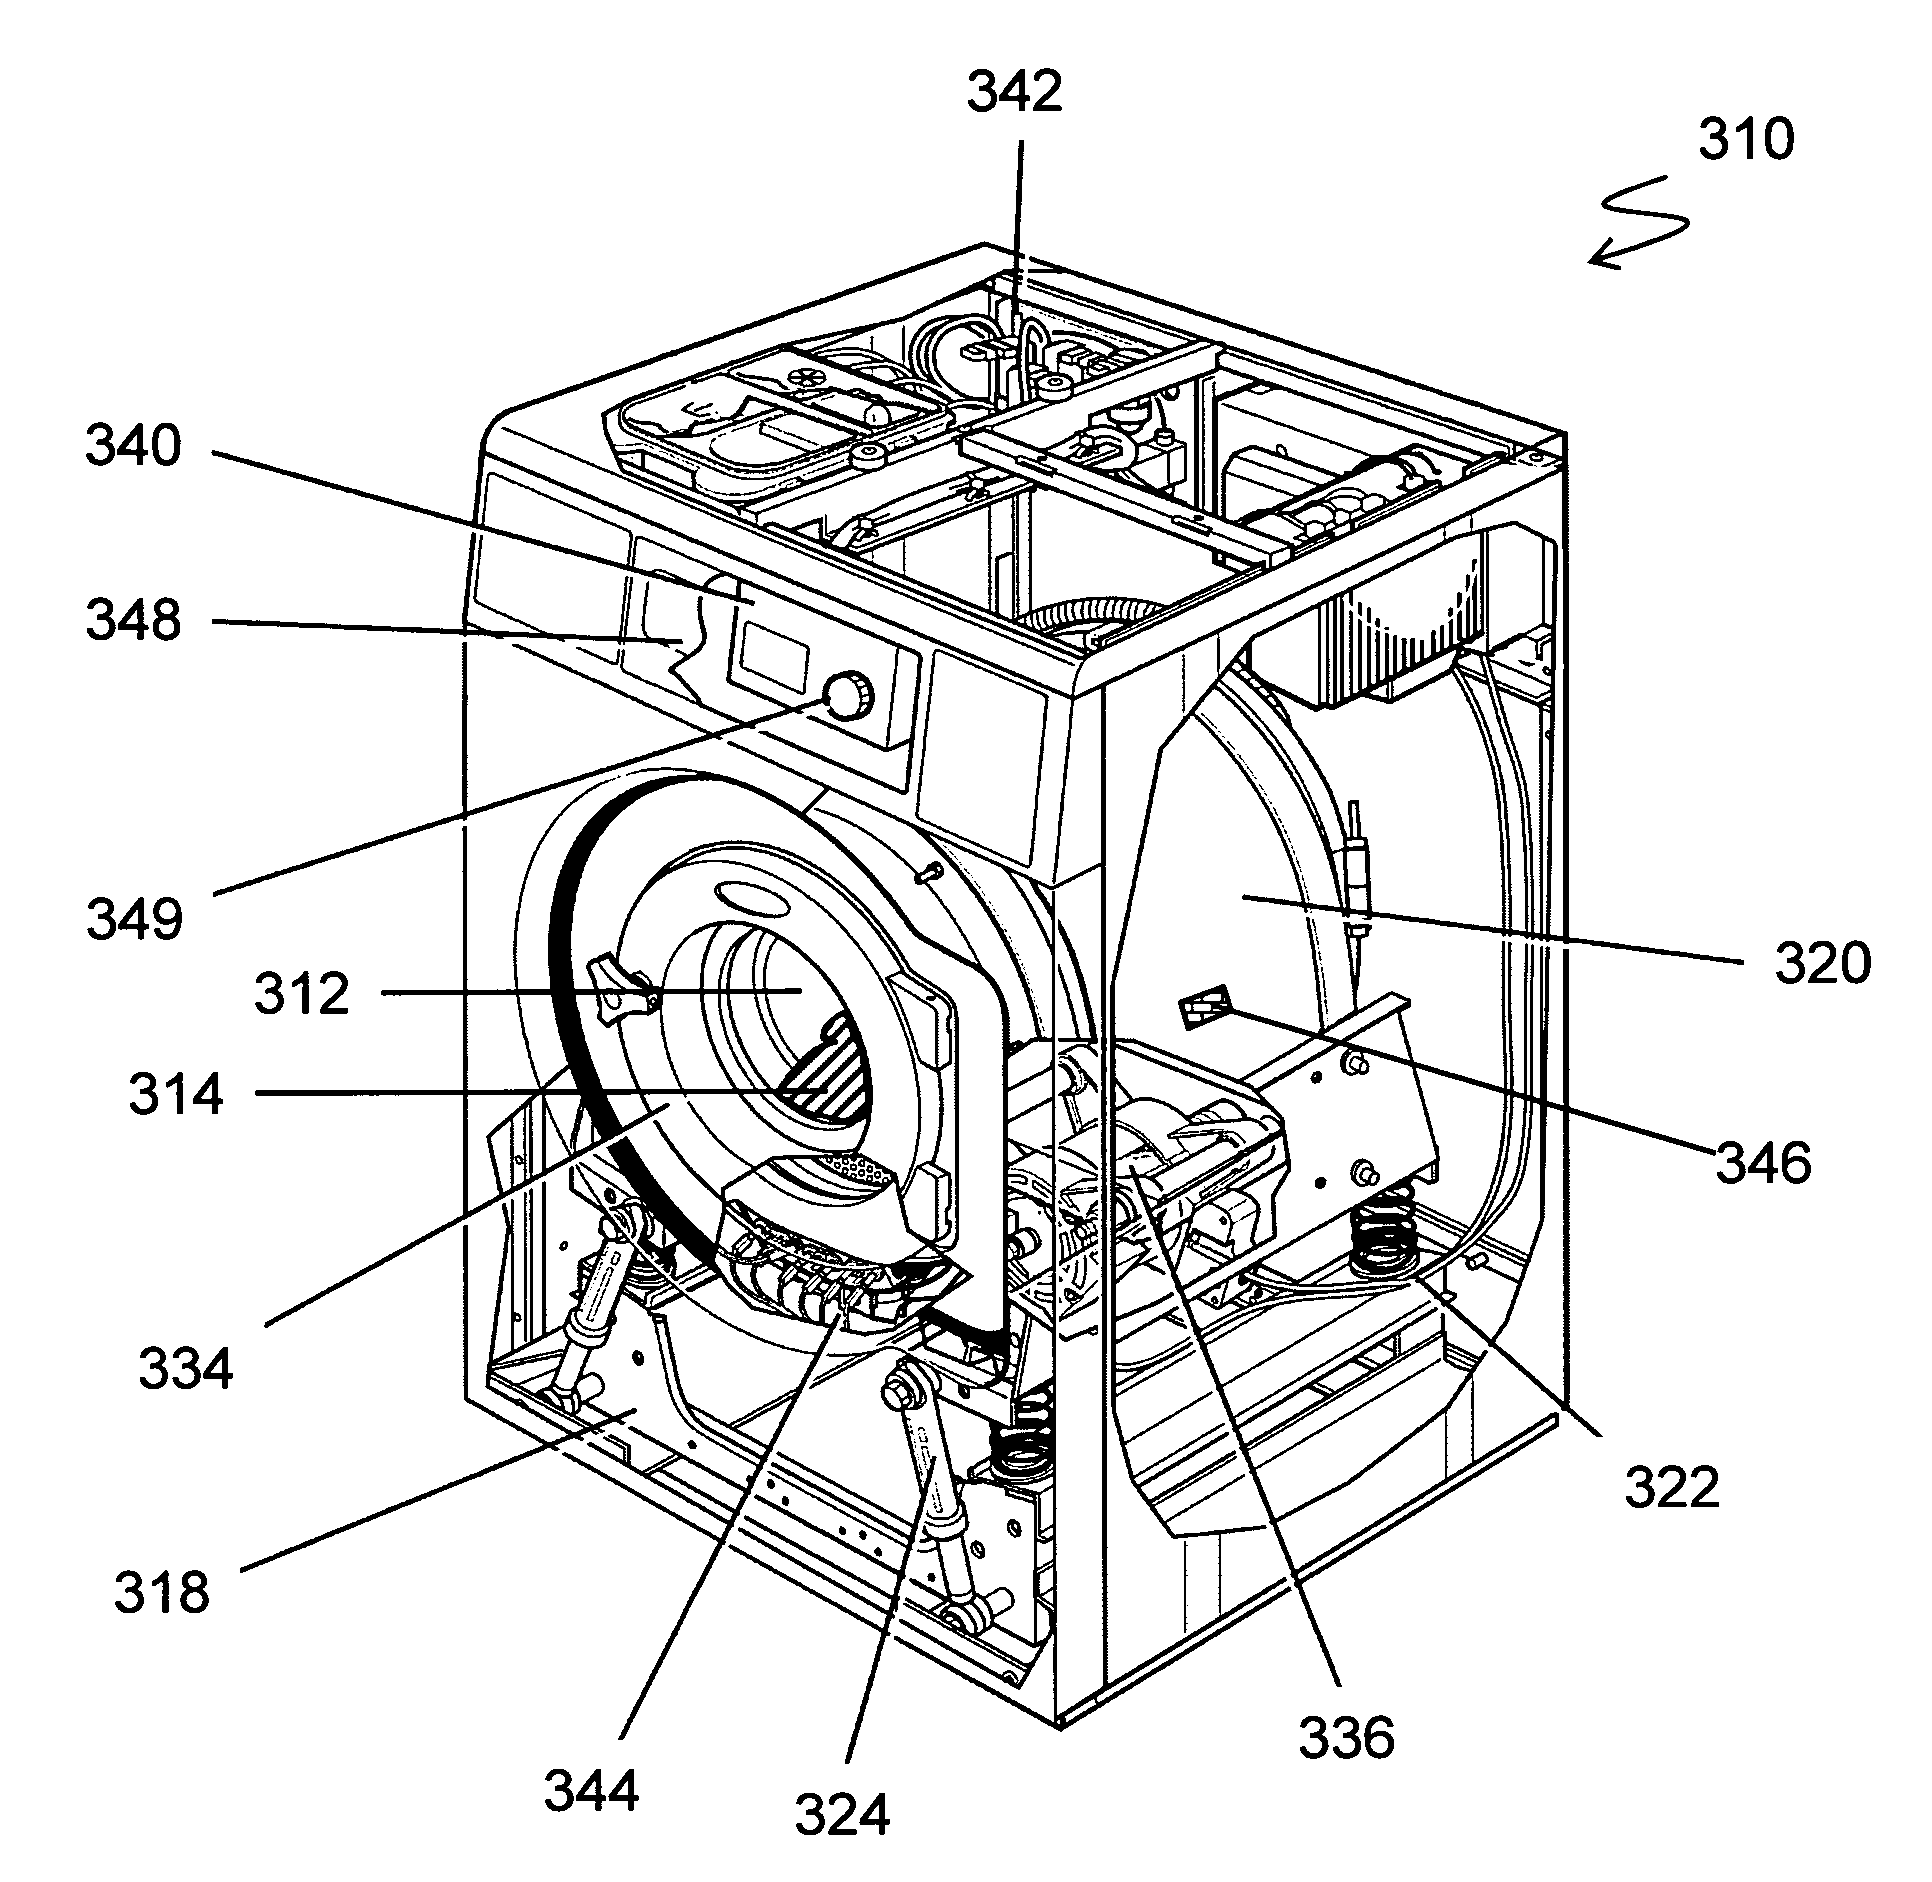 Method for processing laundry, and a laundry processing device